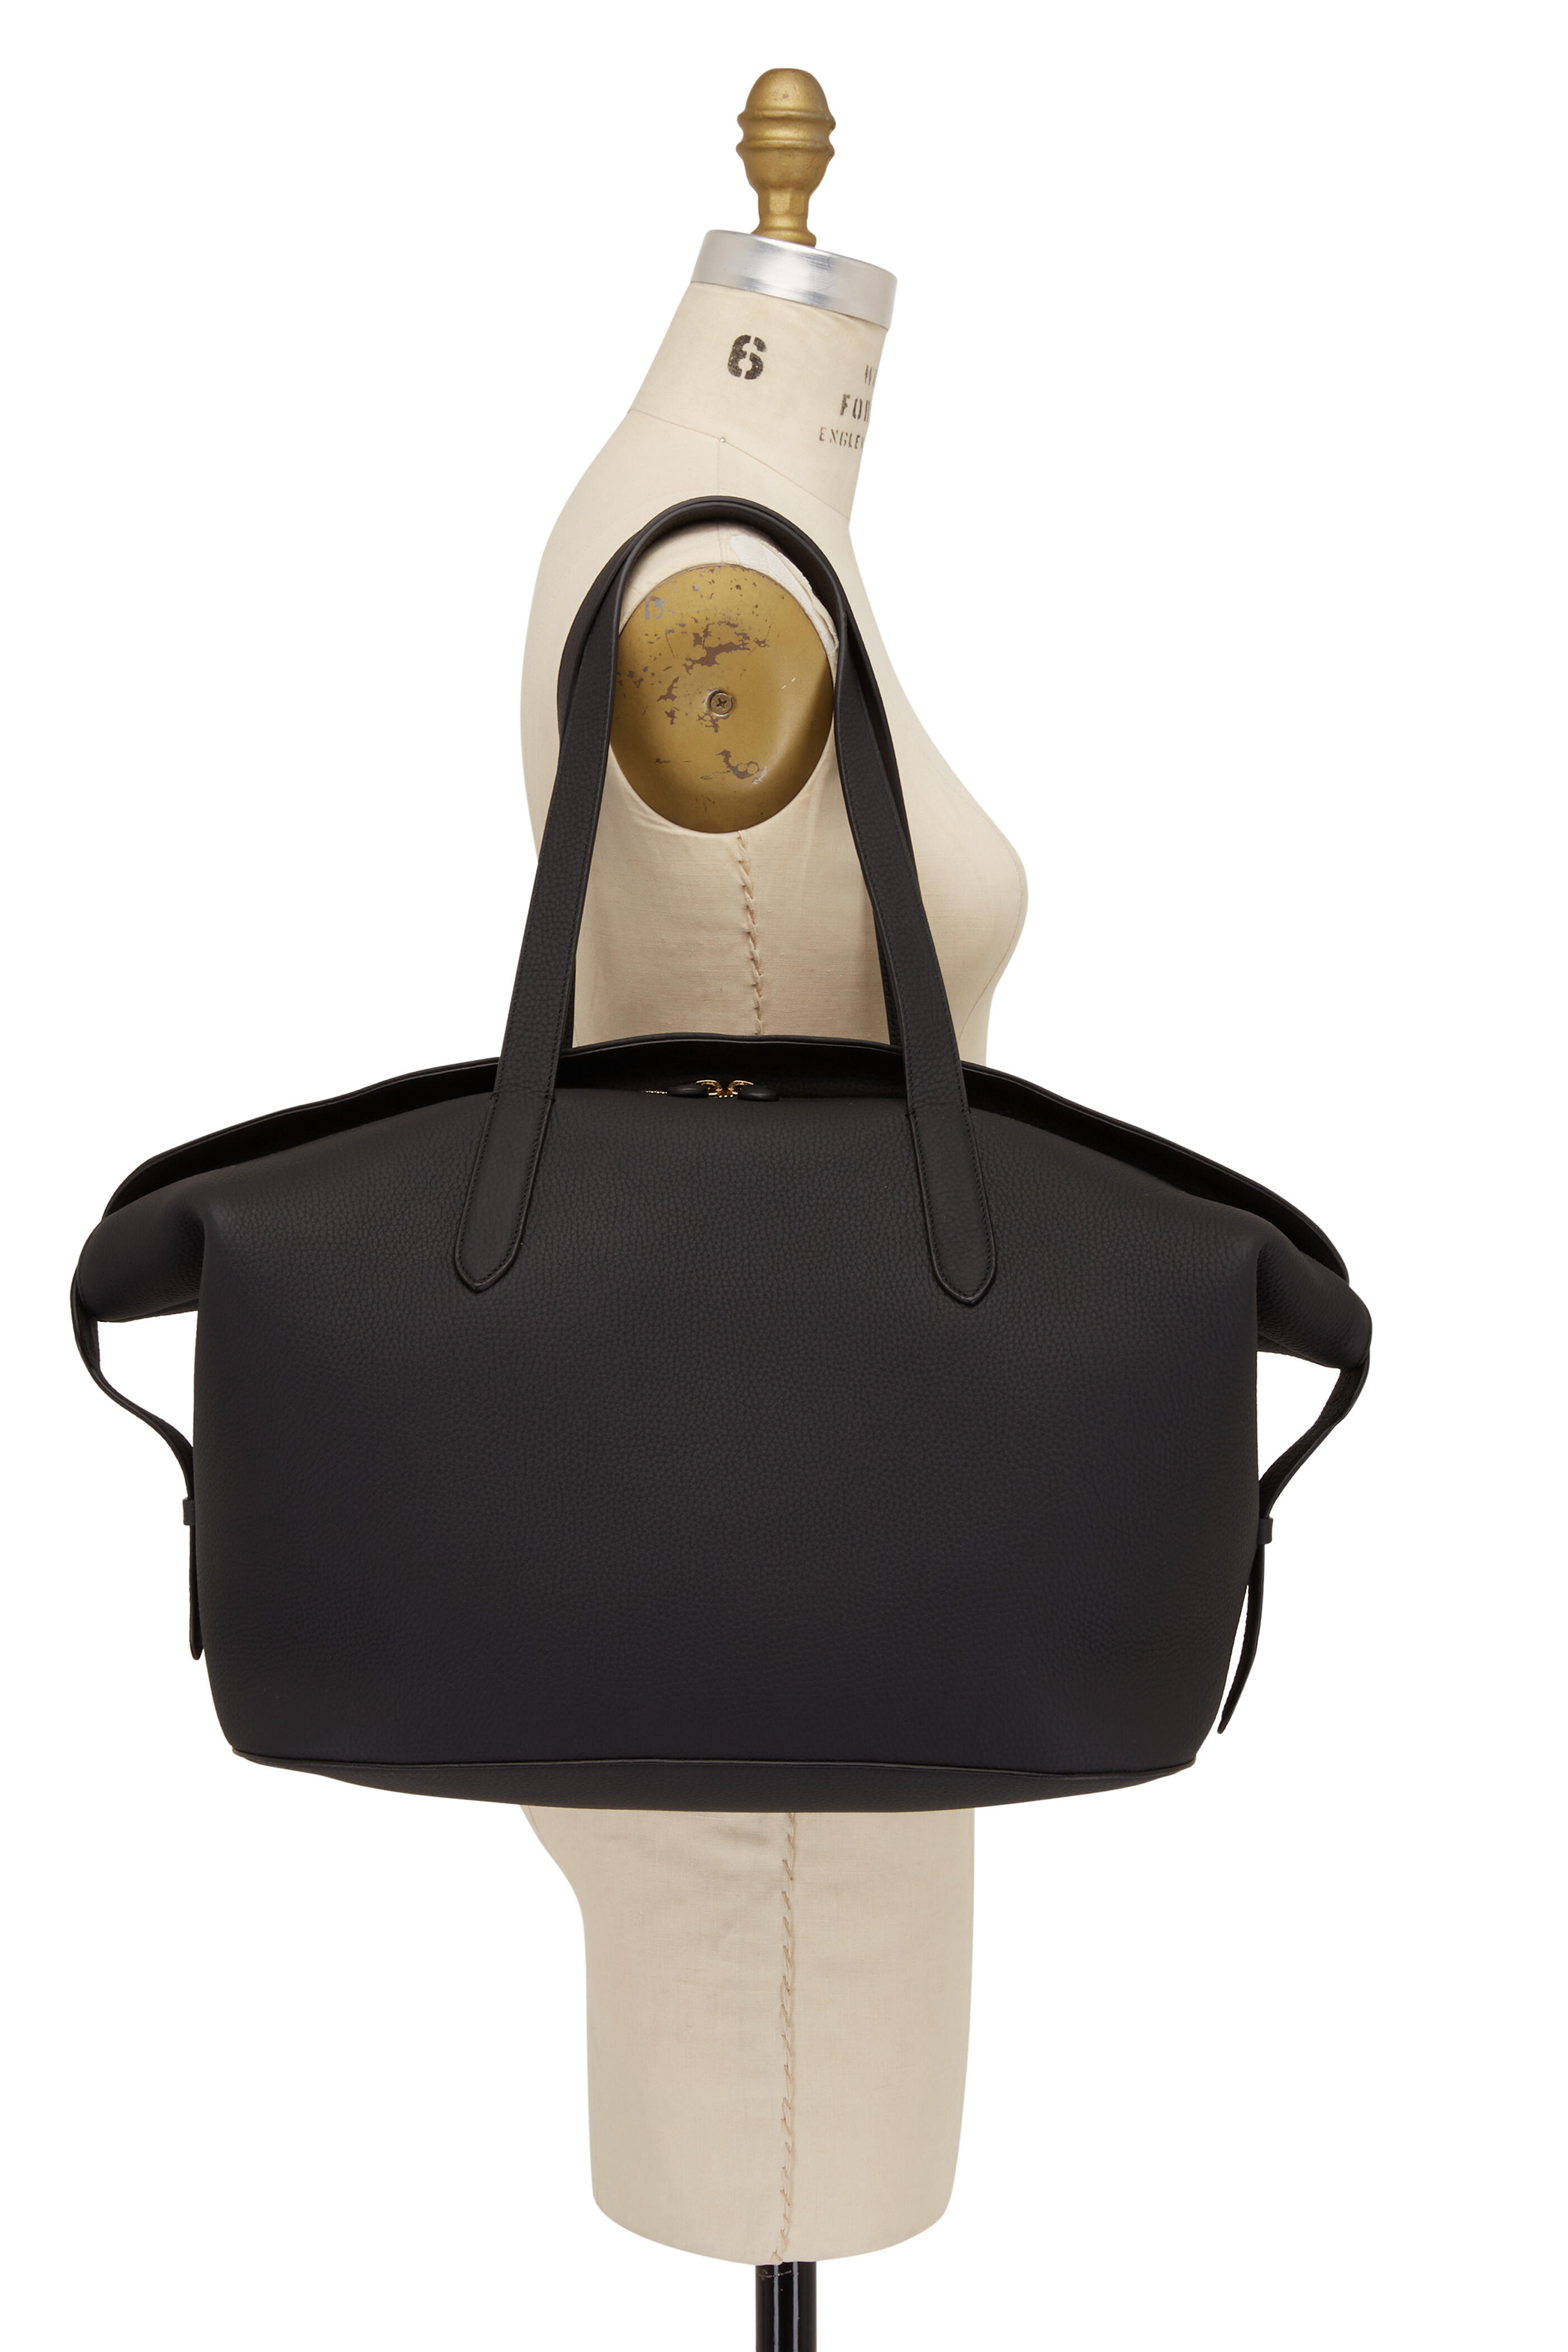 The Drop Women's Avalon Small Tote Bag